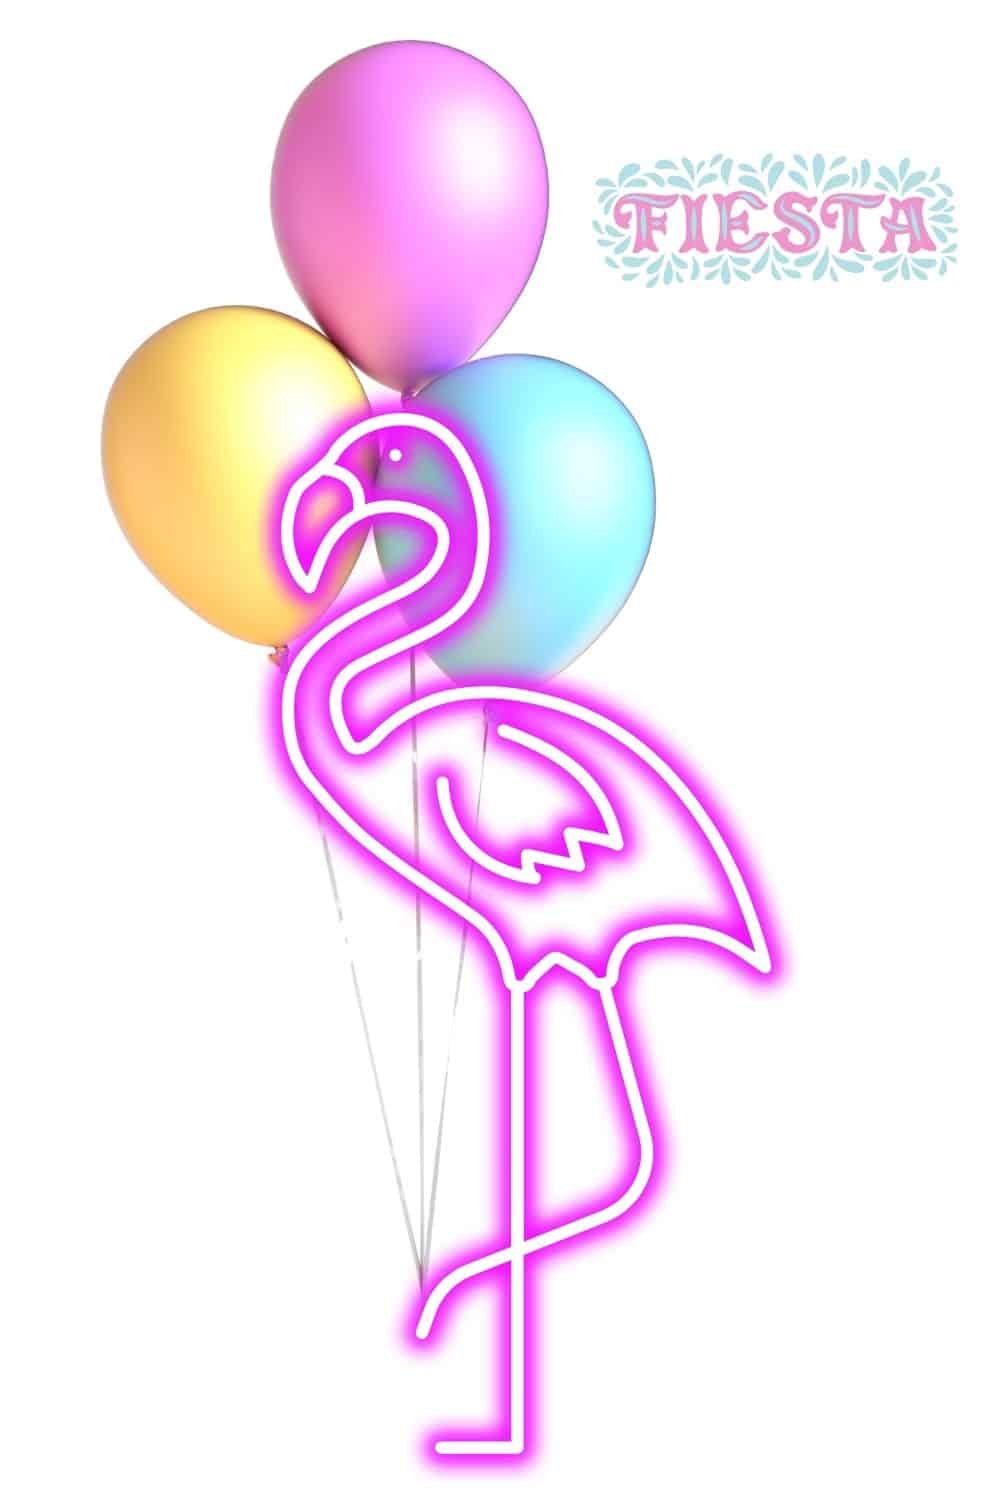 How To Throw A Pink Flamingo Themed Party A flamingo with balloons